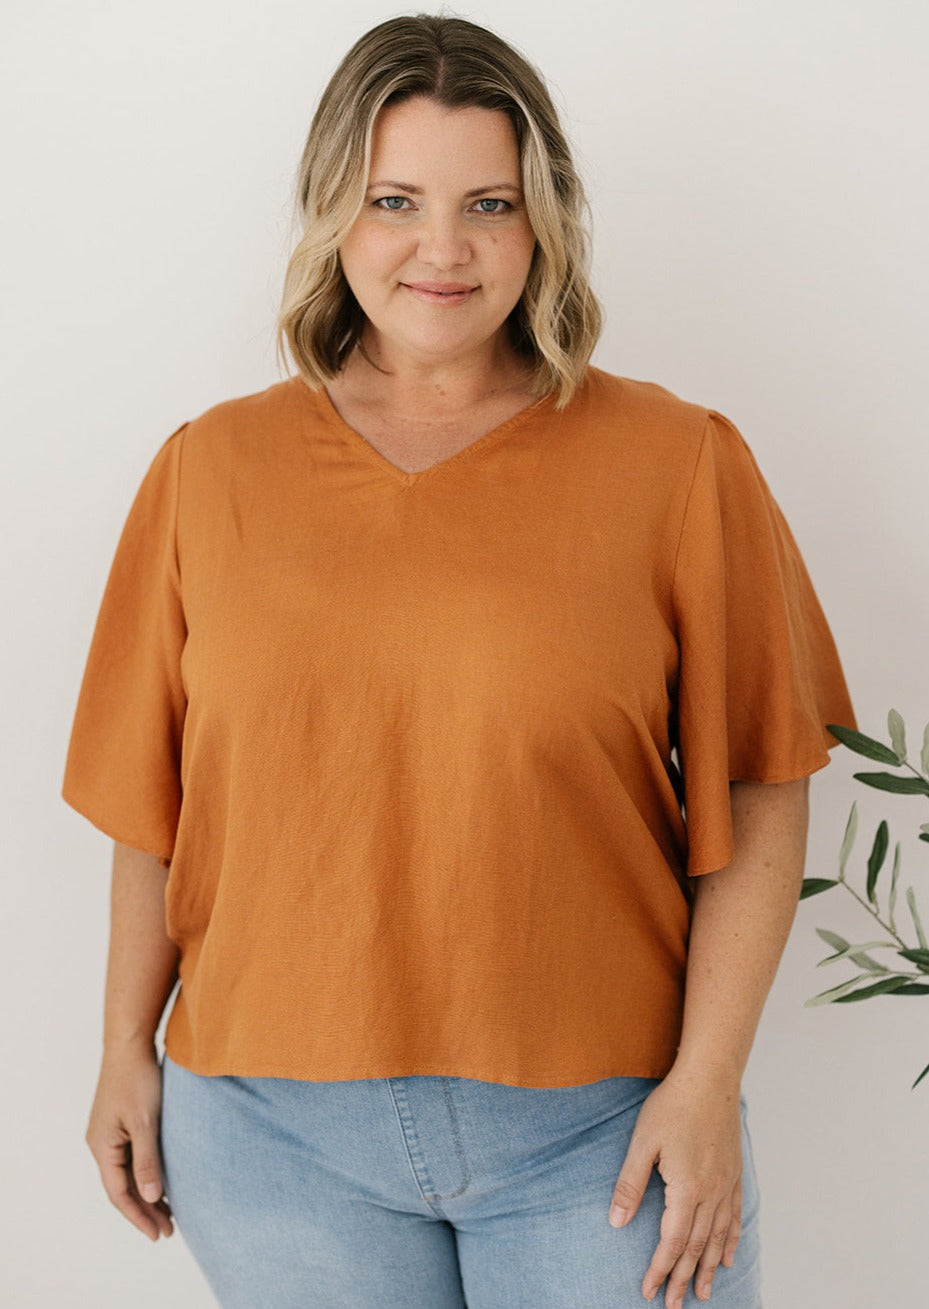  Smart Casual Top for Curvy Women